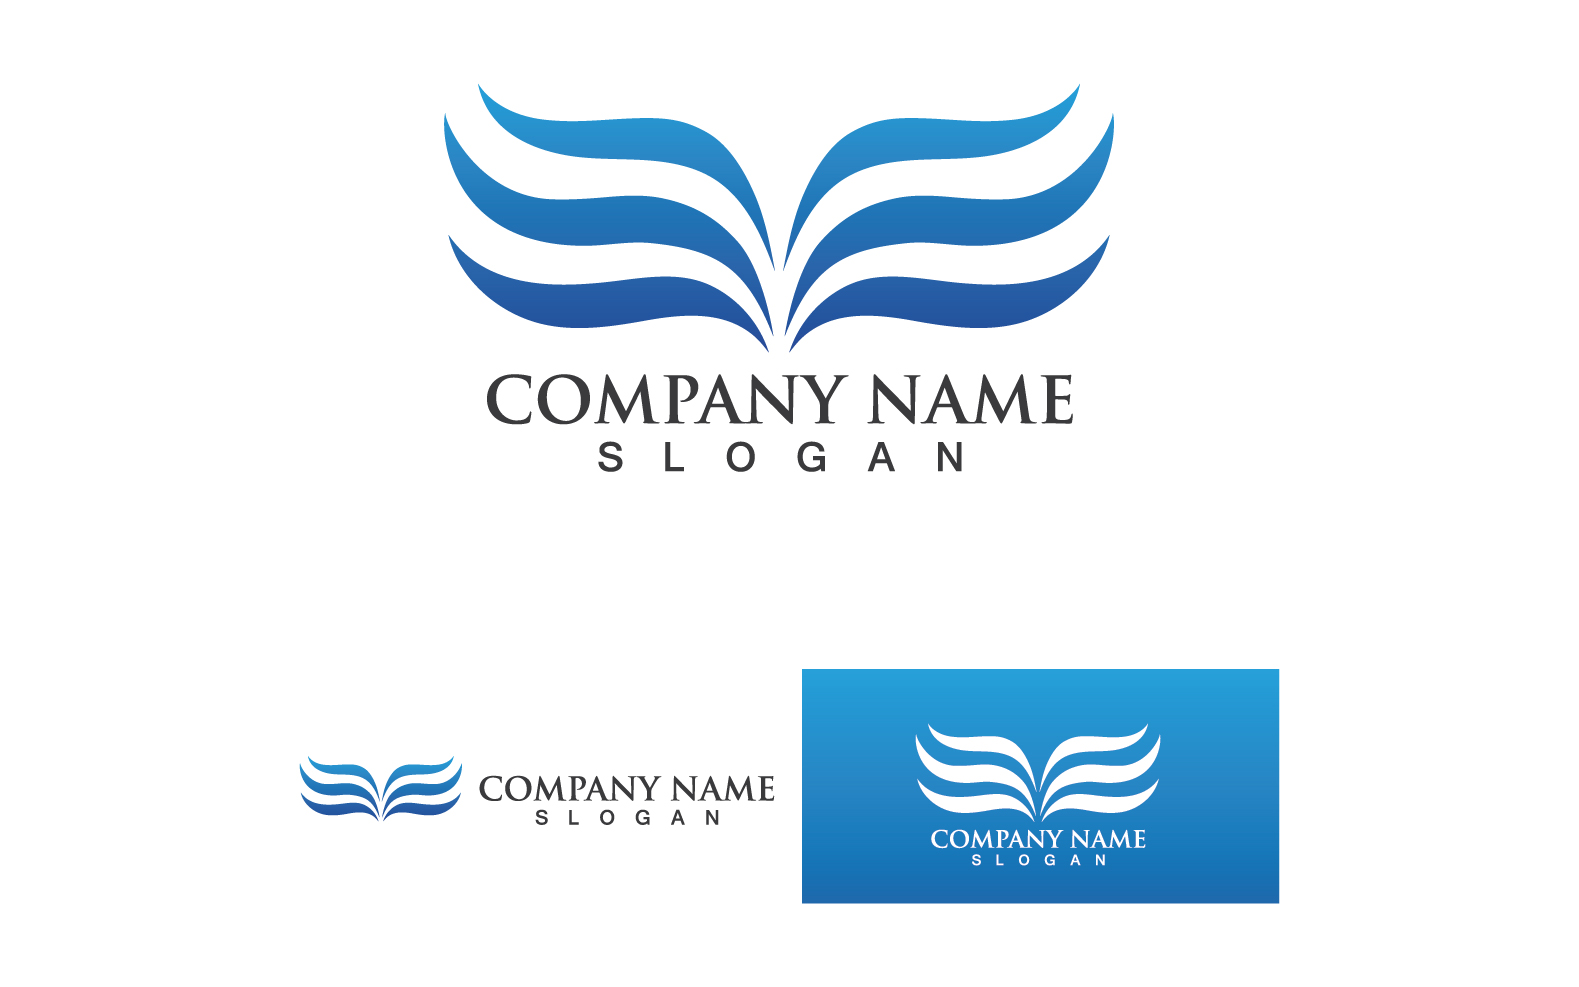 Wing Bird Business Logo Your Company Name V62